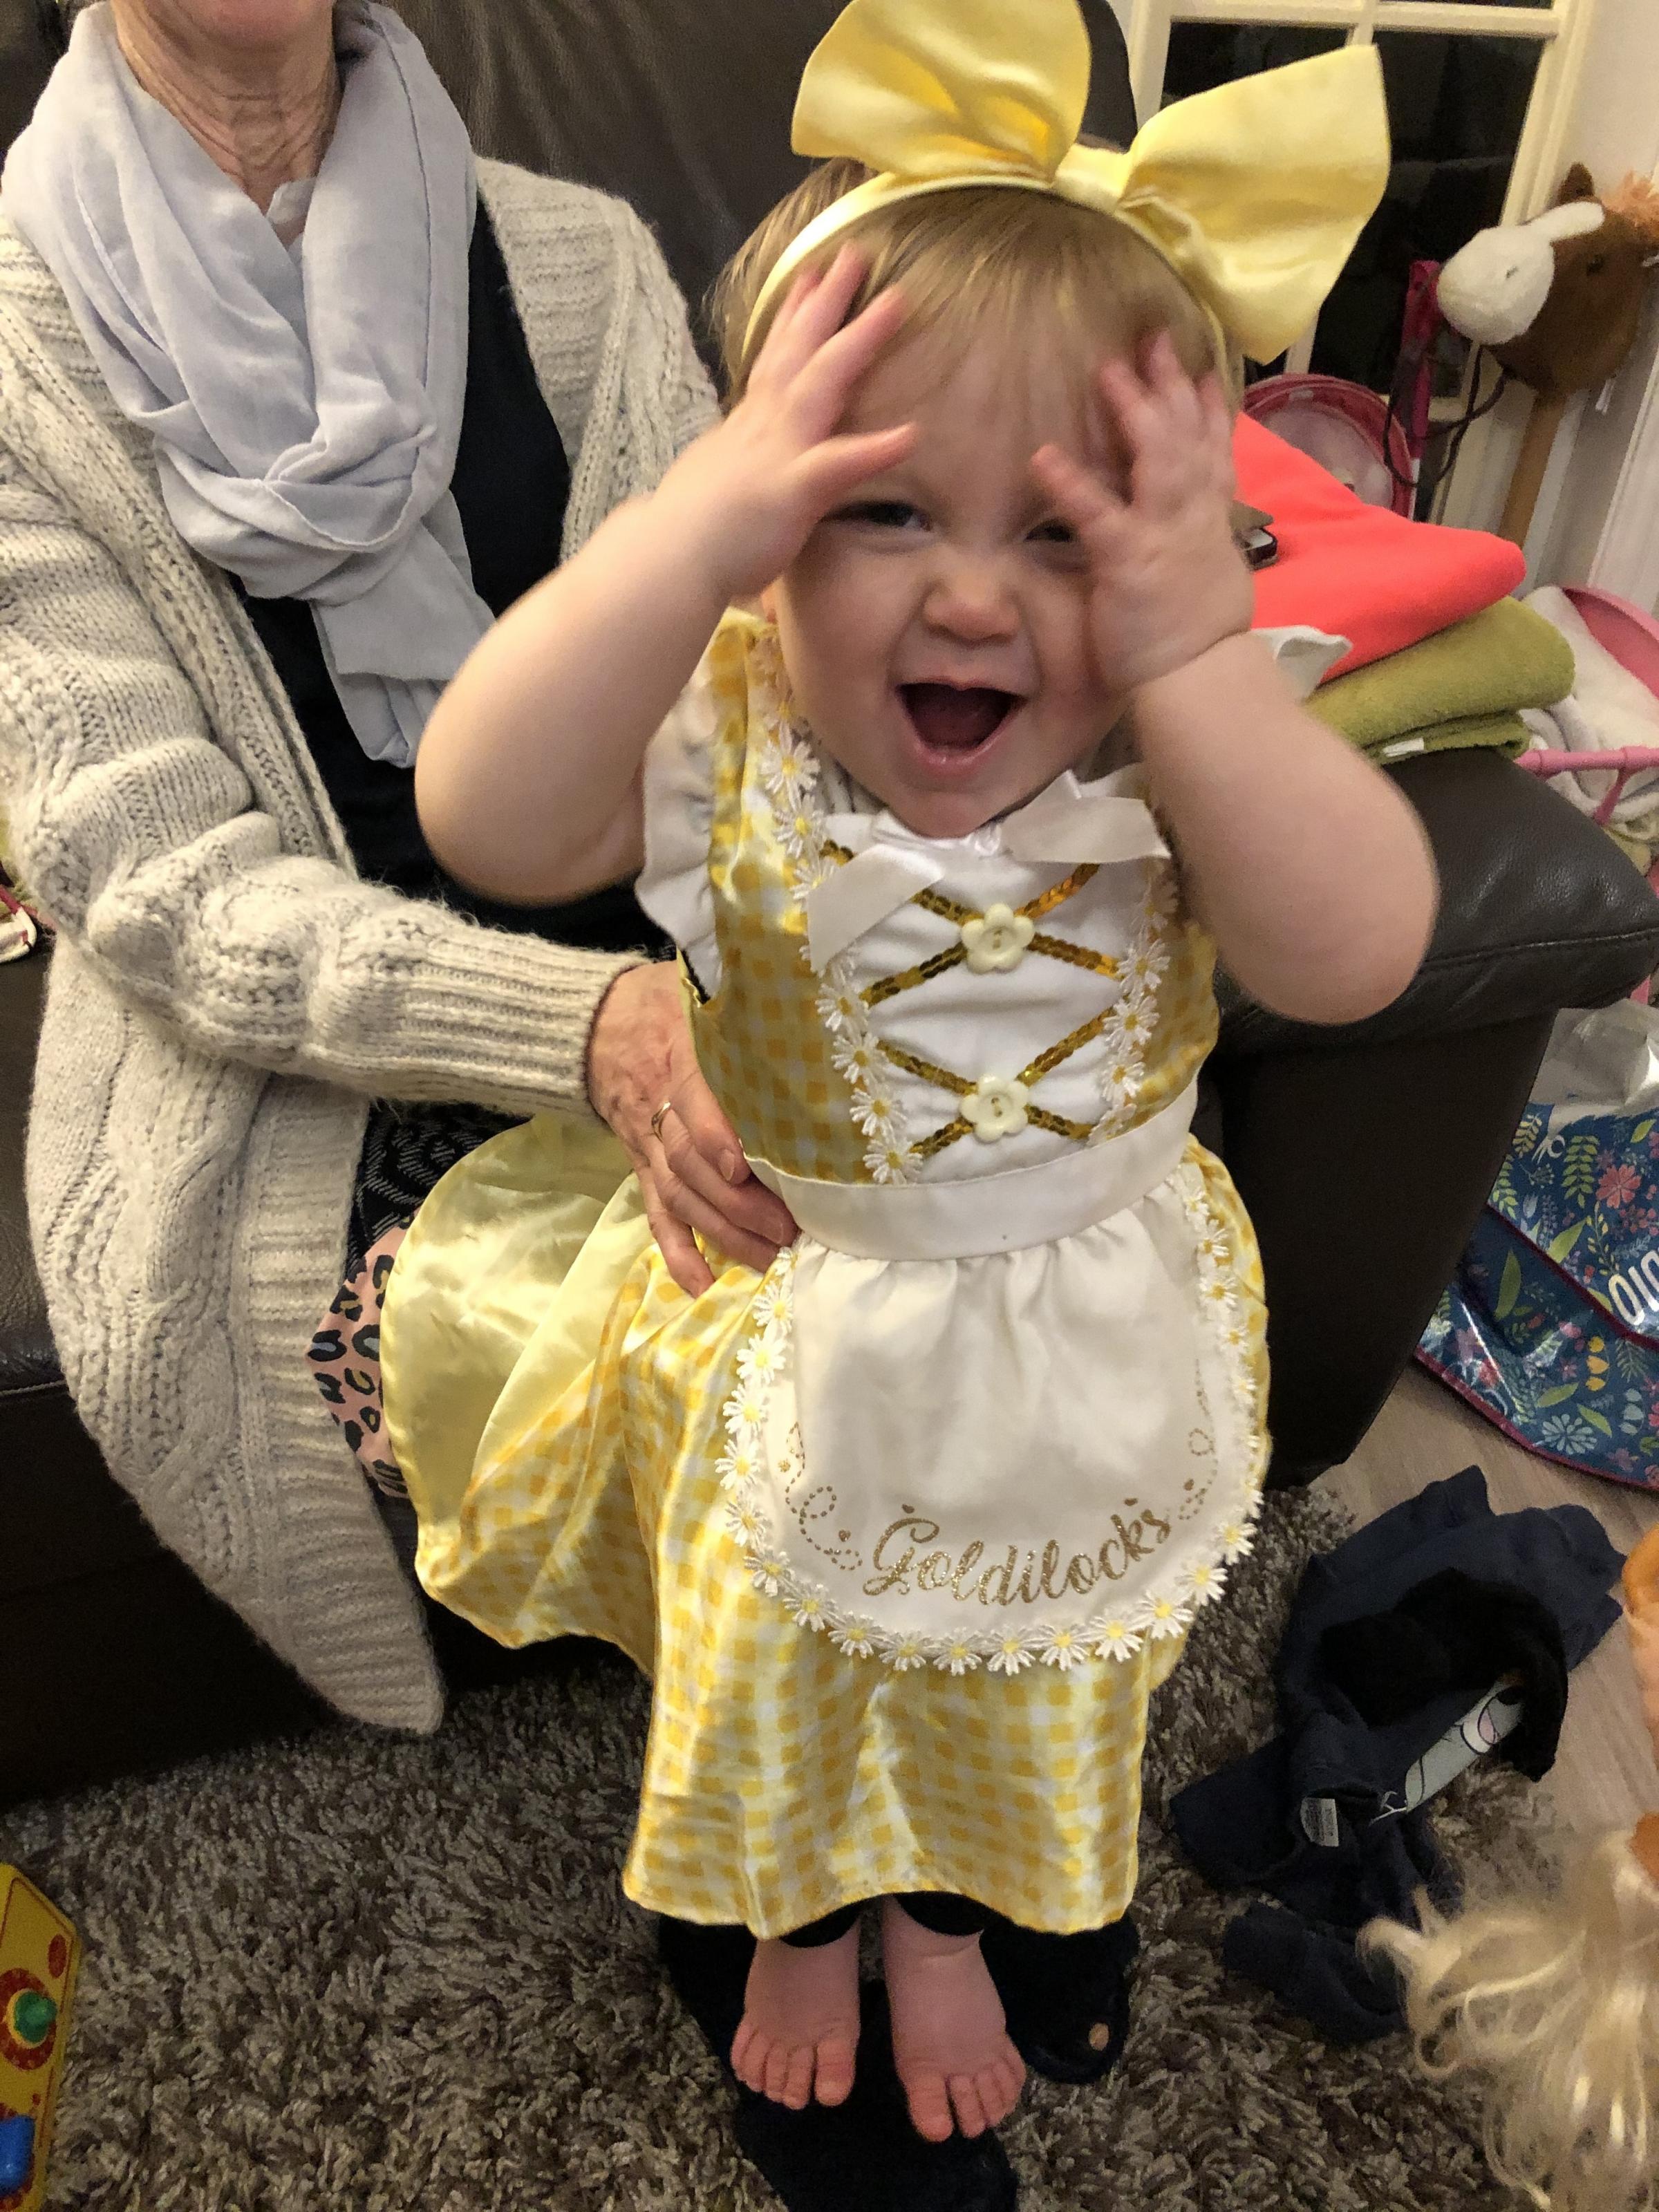 Georgie dressed up as Goldilocks as she approaches her first birthday